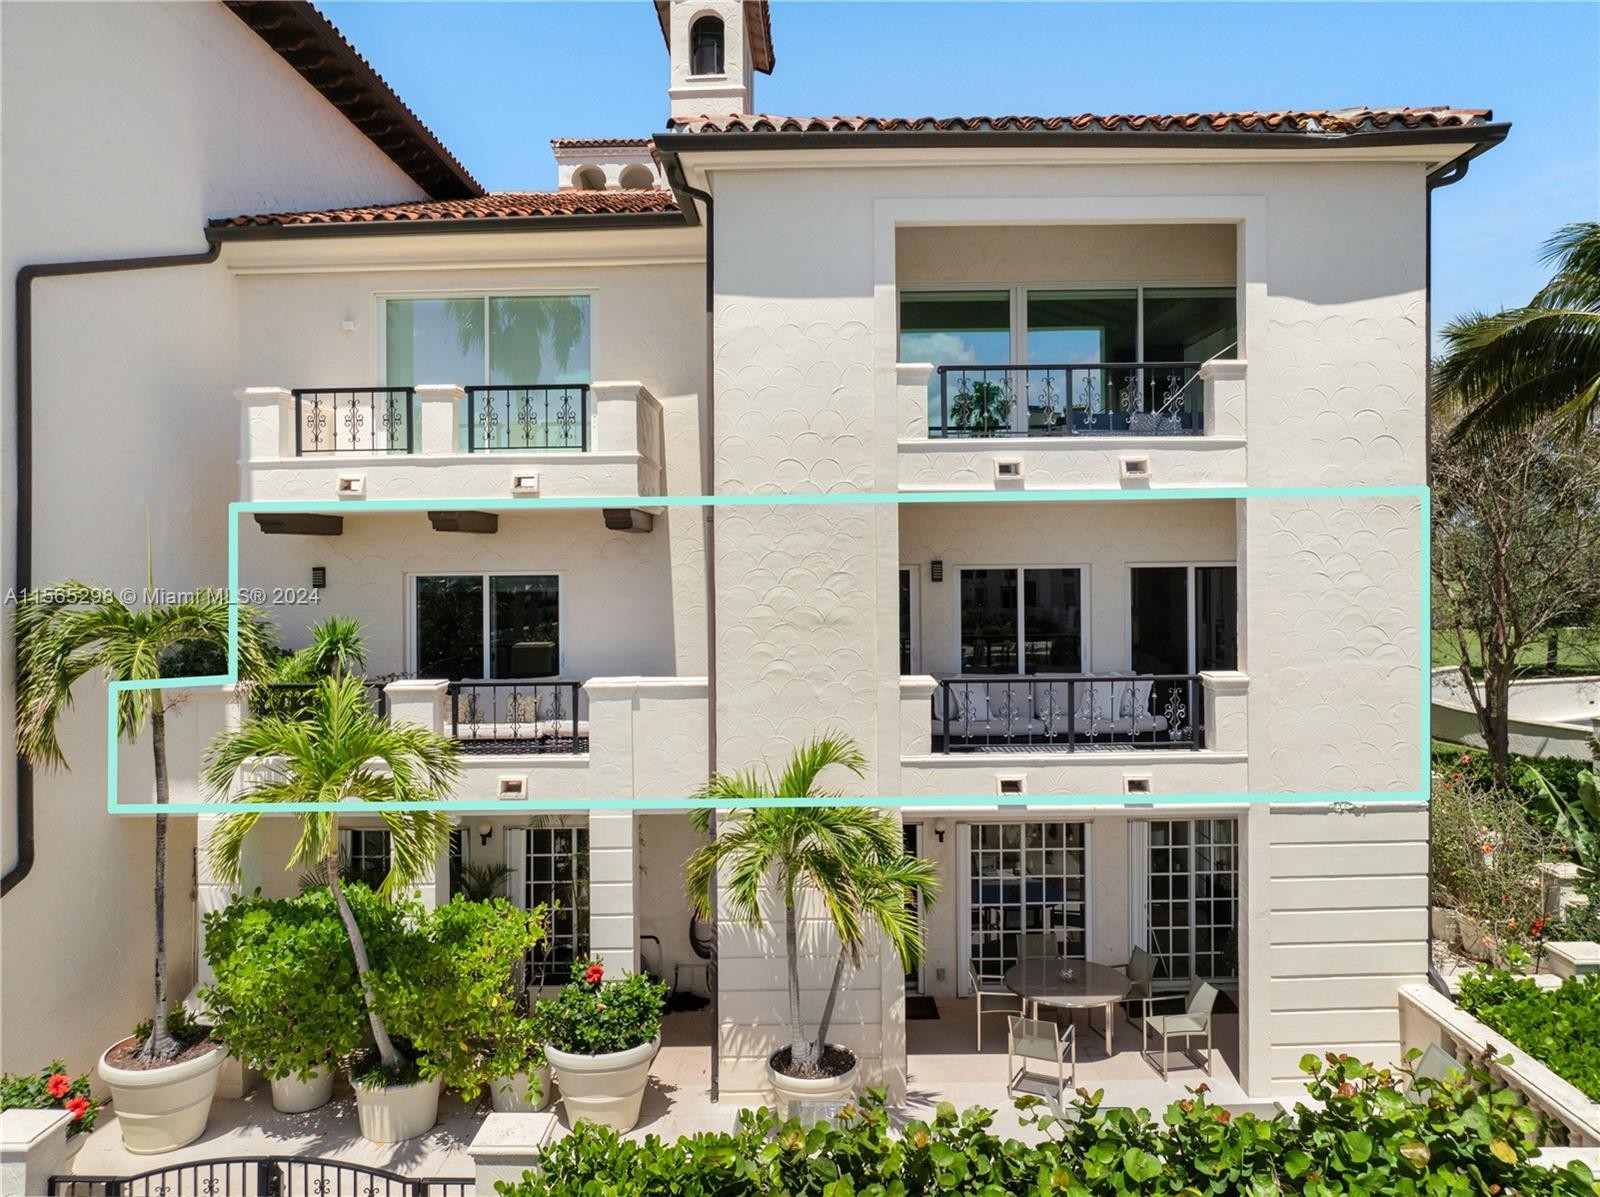 43. 2221 Fisher Island Dr